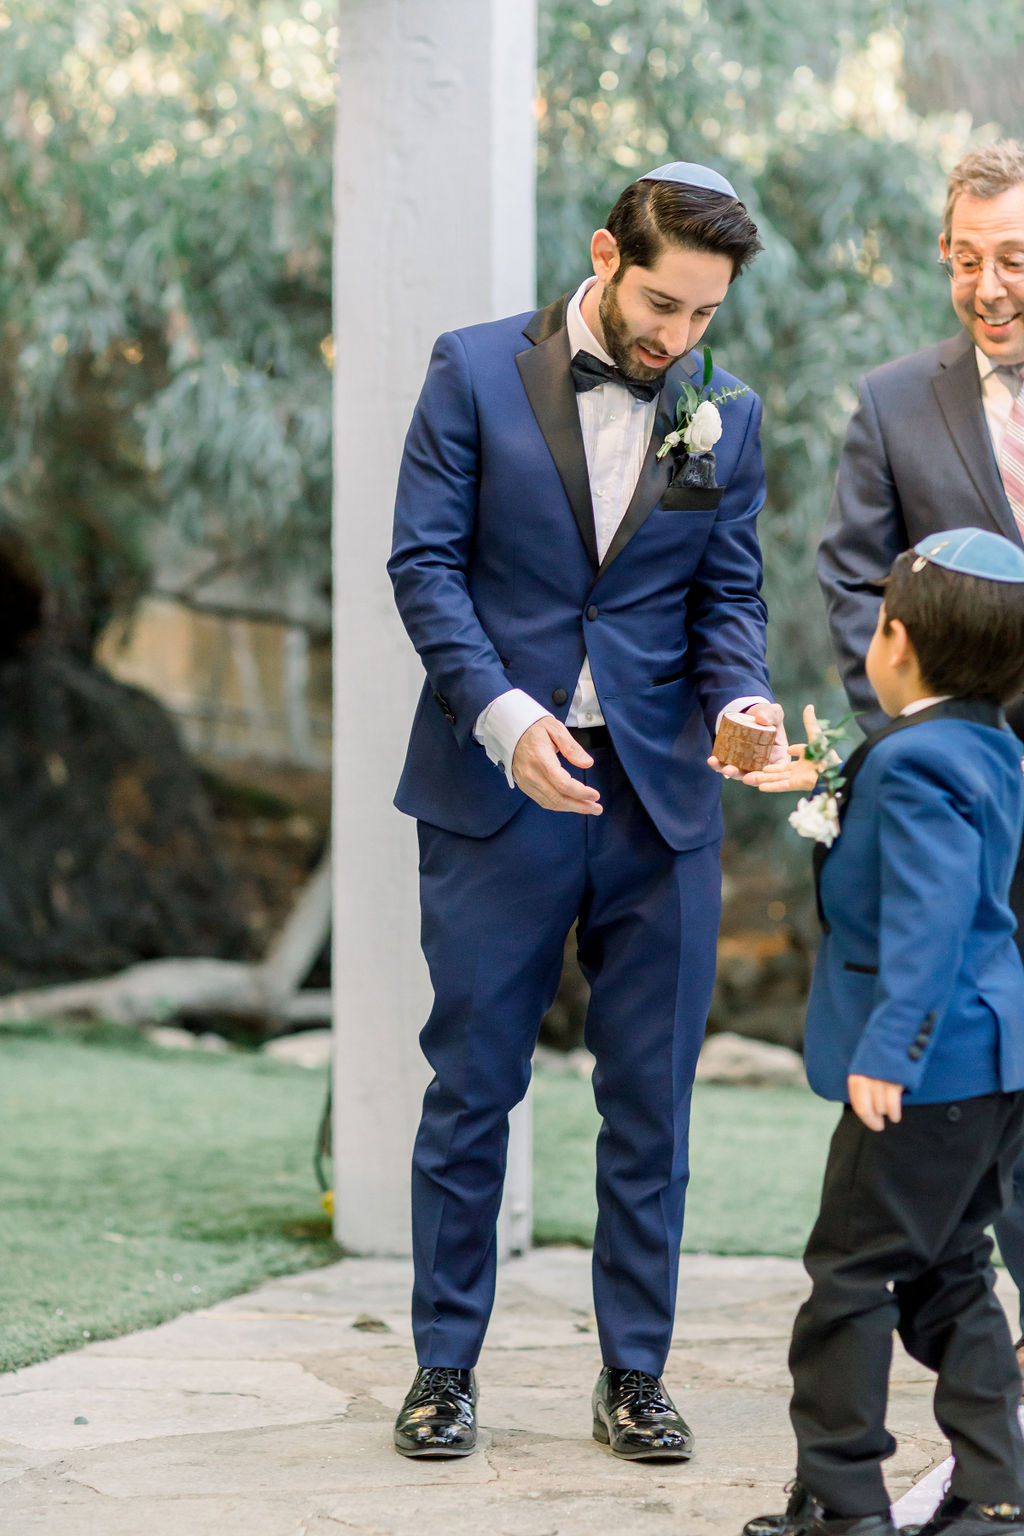 ring bearer in blue suit hands groom wooden ring box during wedding ceremony